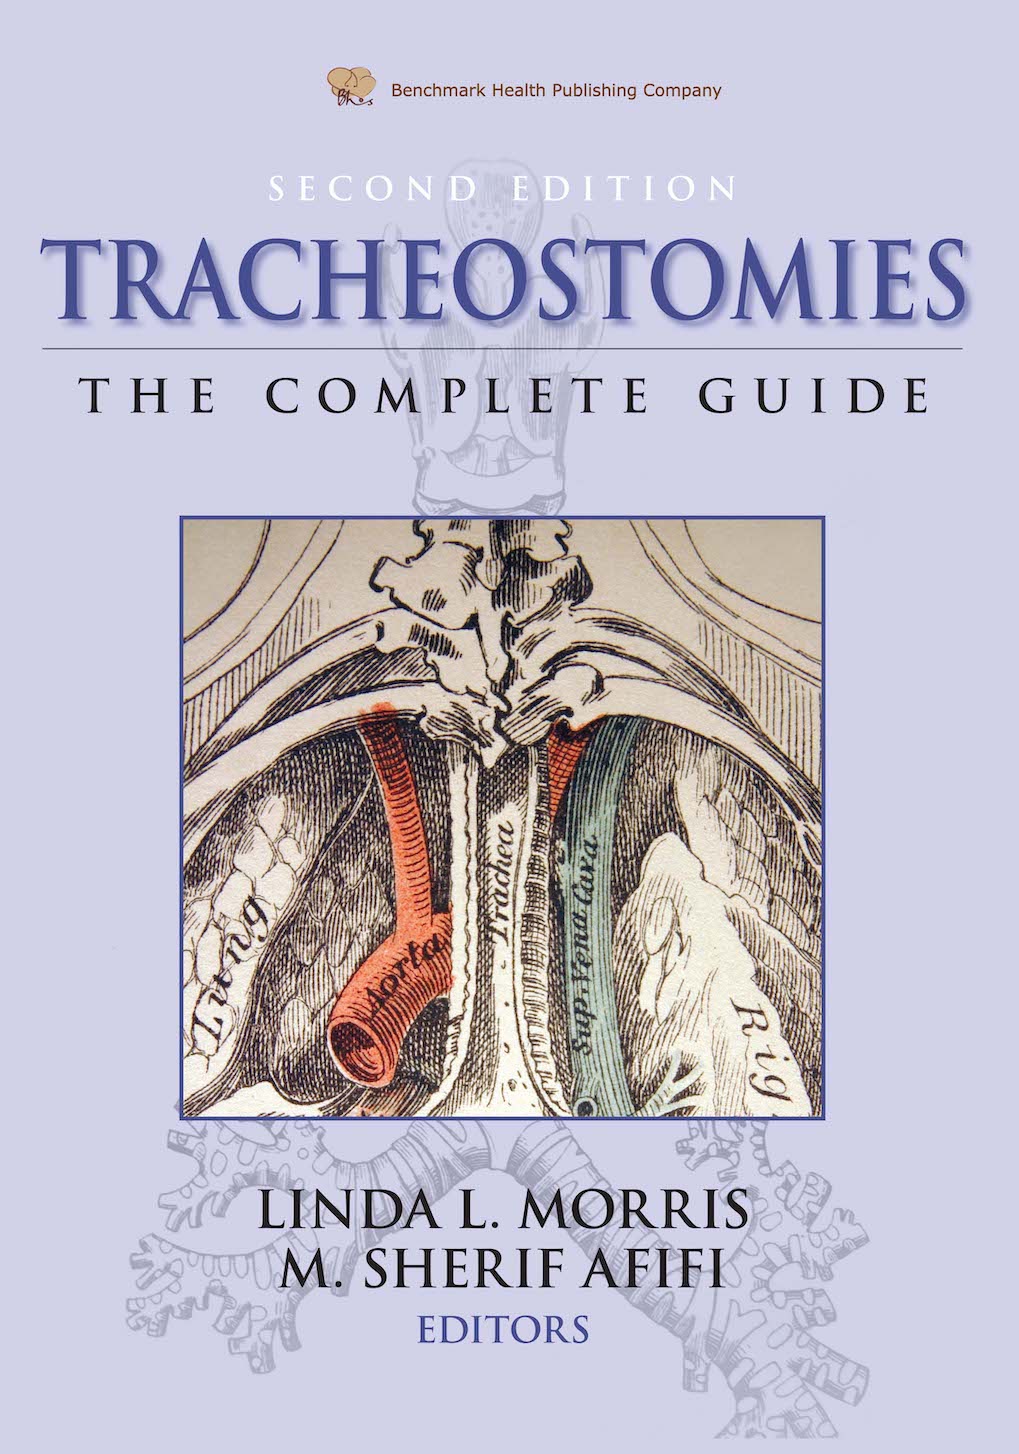 Tracheostomies: The Complete Guide Second Edition 2021